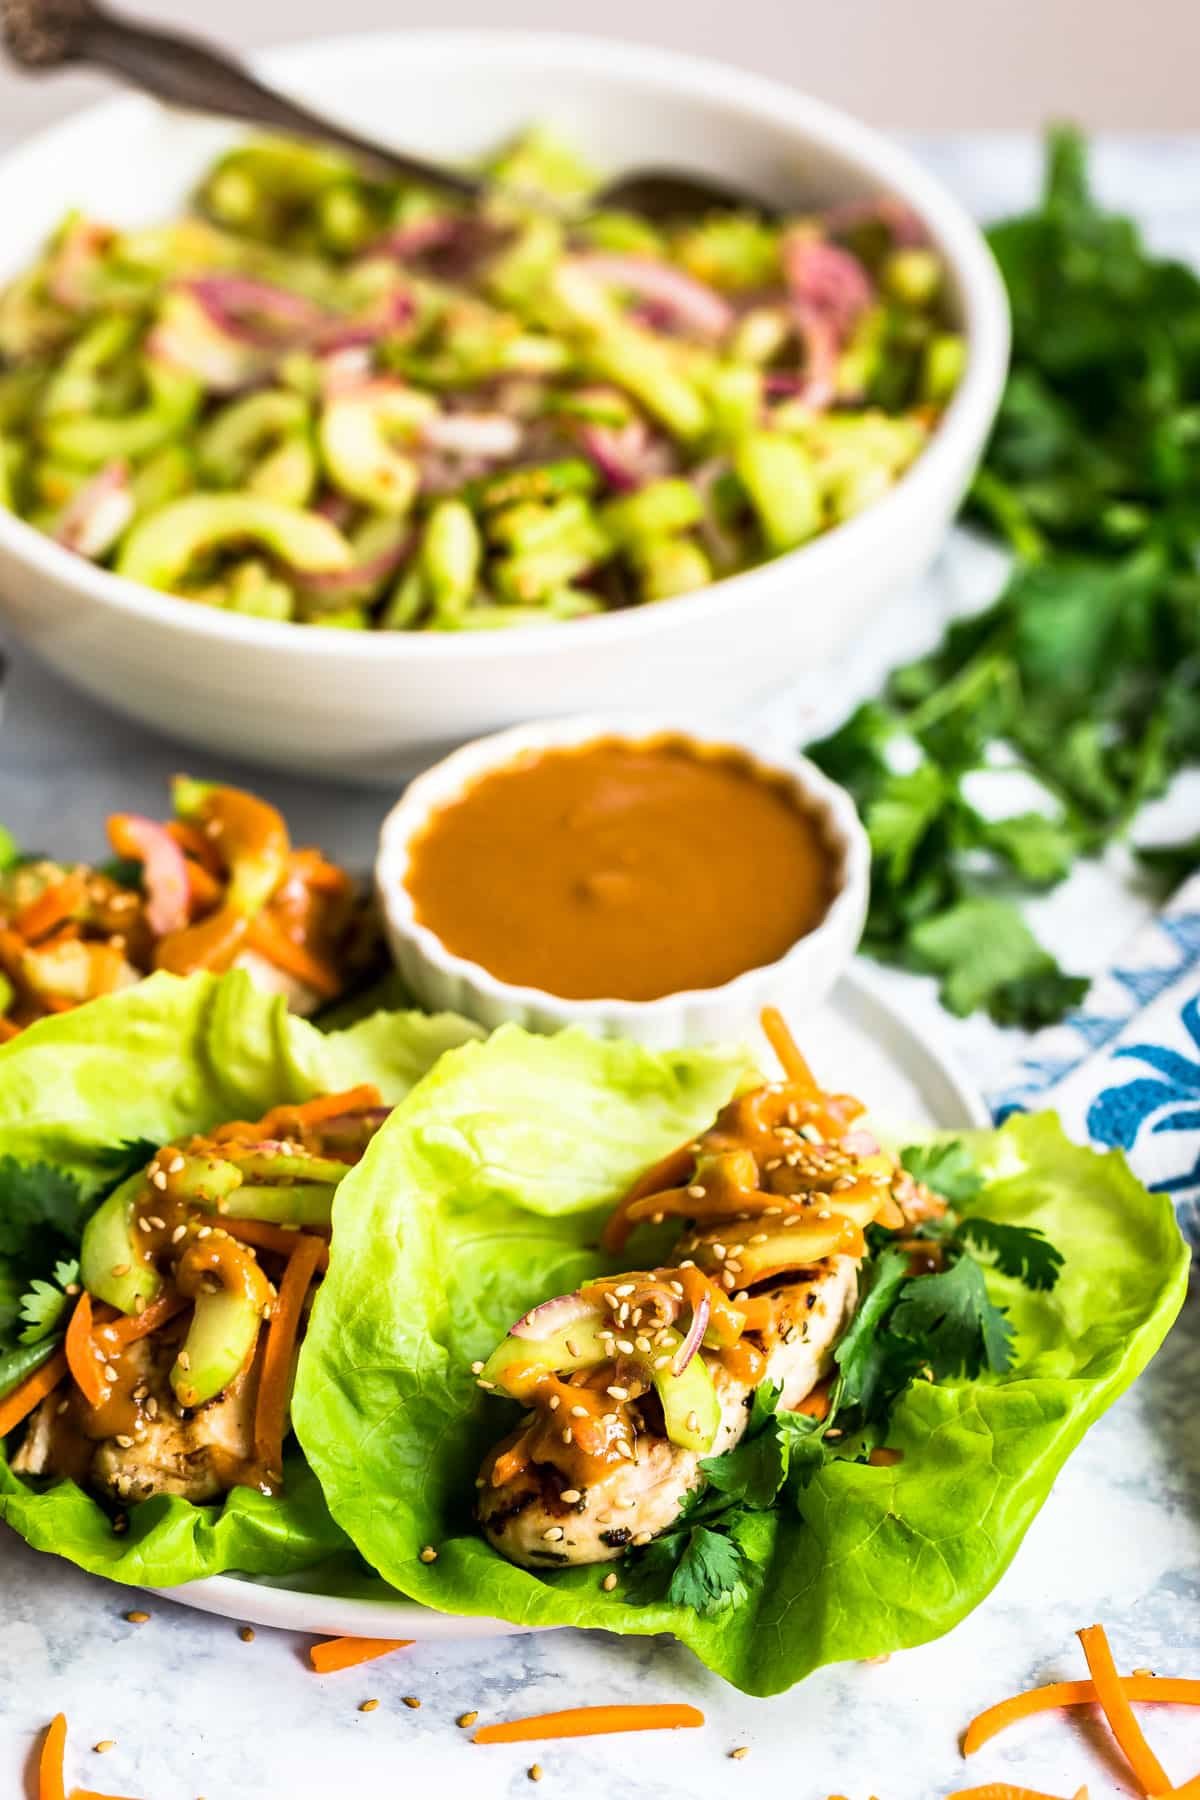 Chicken wraps on lettuce on a place with peanut sauce and a cucumber salad behind it.